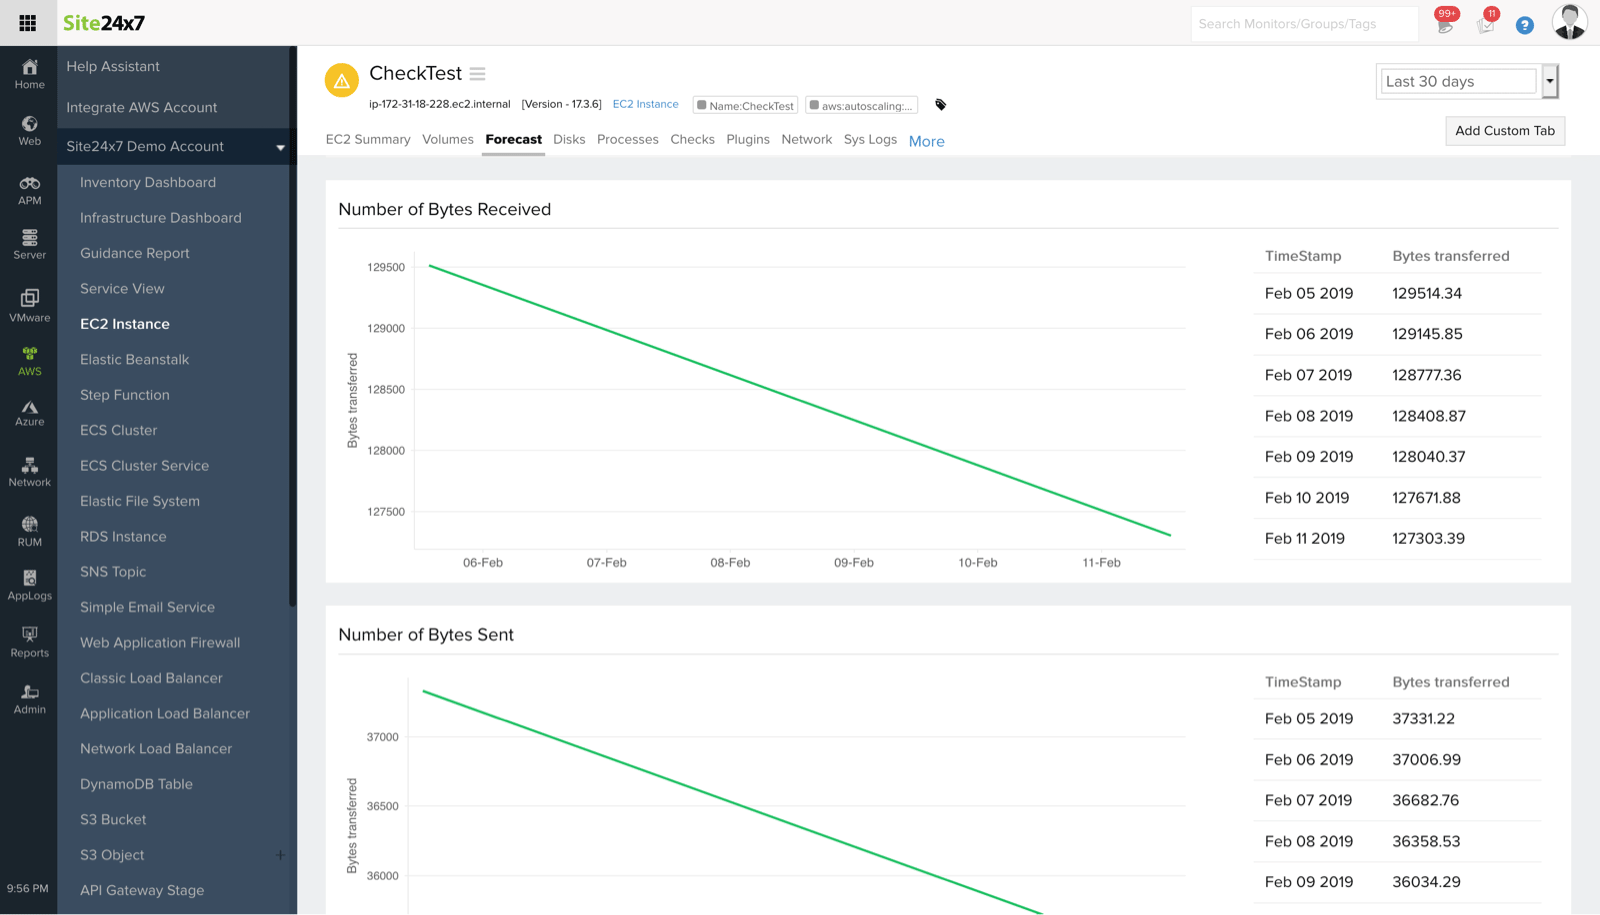 View the AWS performance metrics and enable AWS forecasting